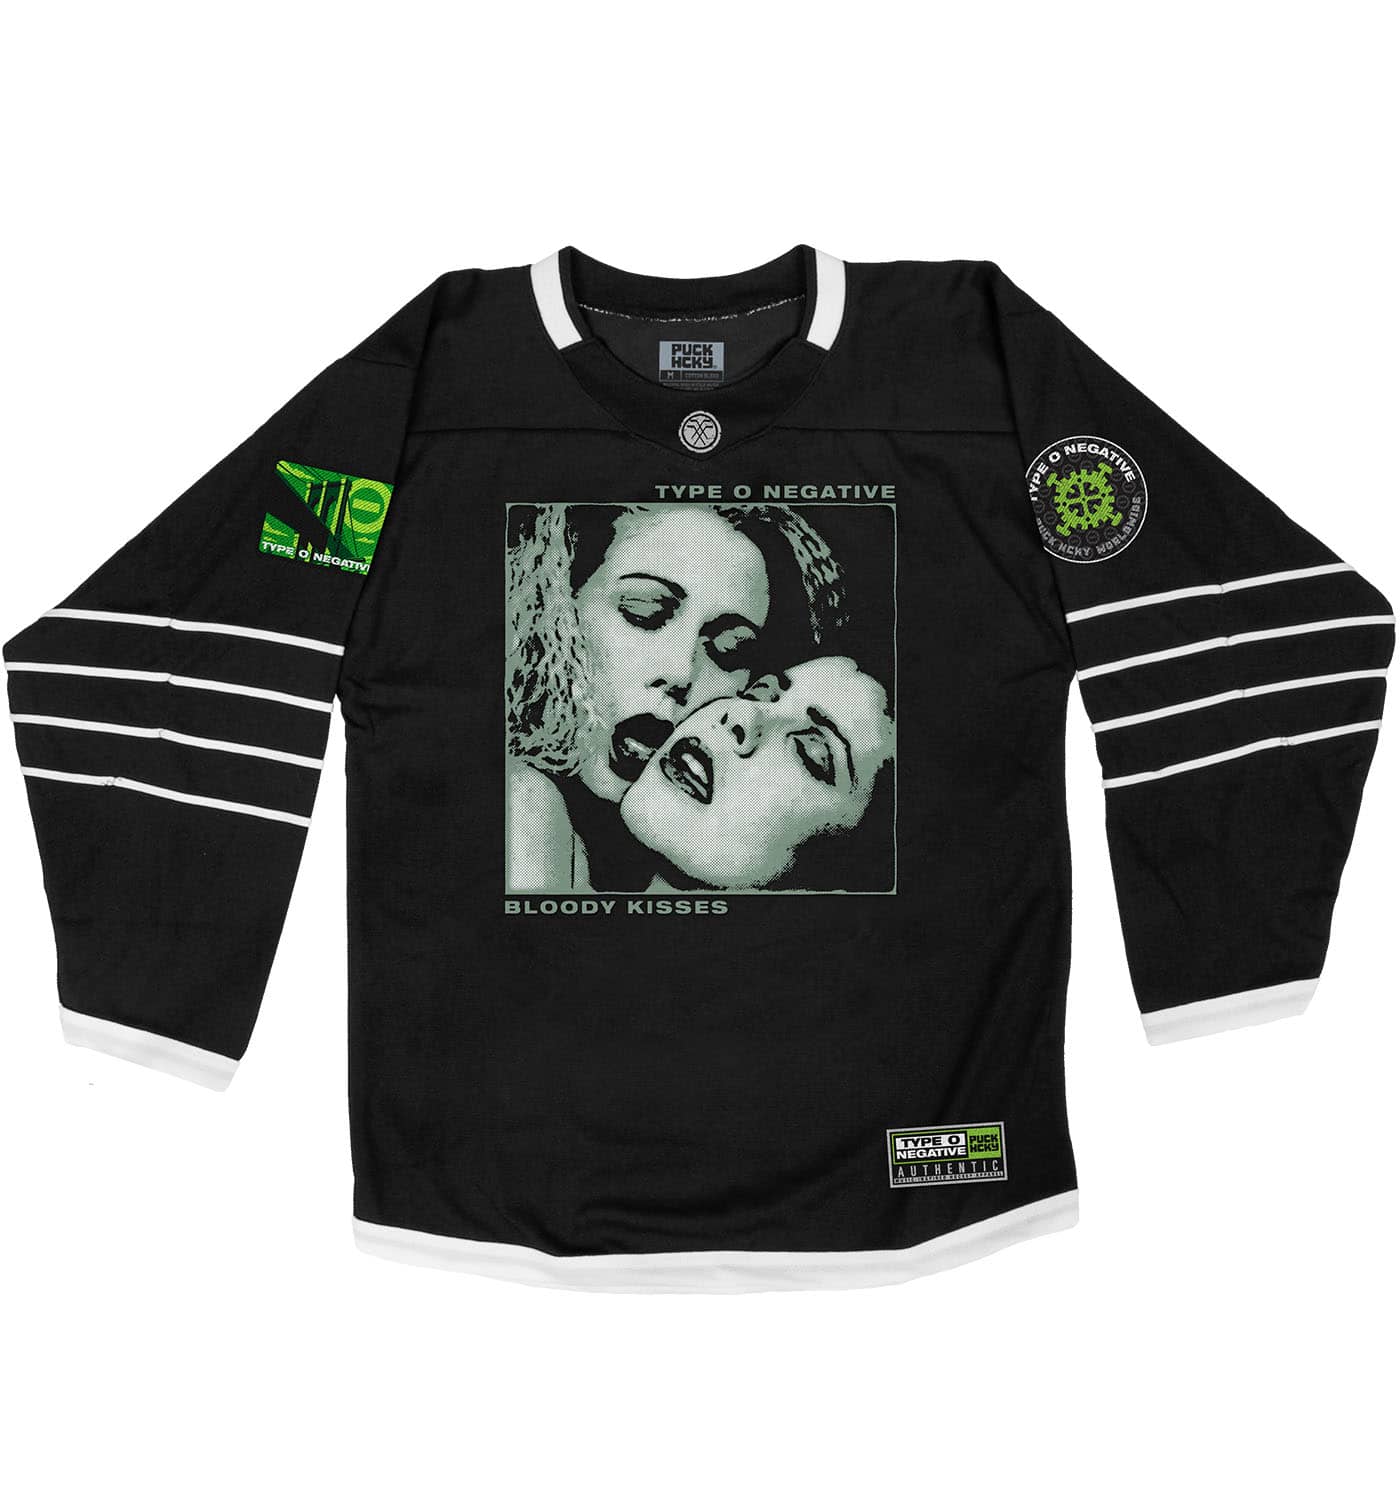 TYPE O NEGATIVE 'BLOODY KISSES' hockey jersey in black and white front view